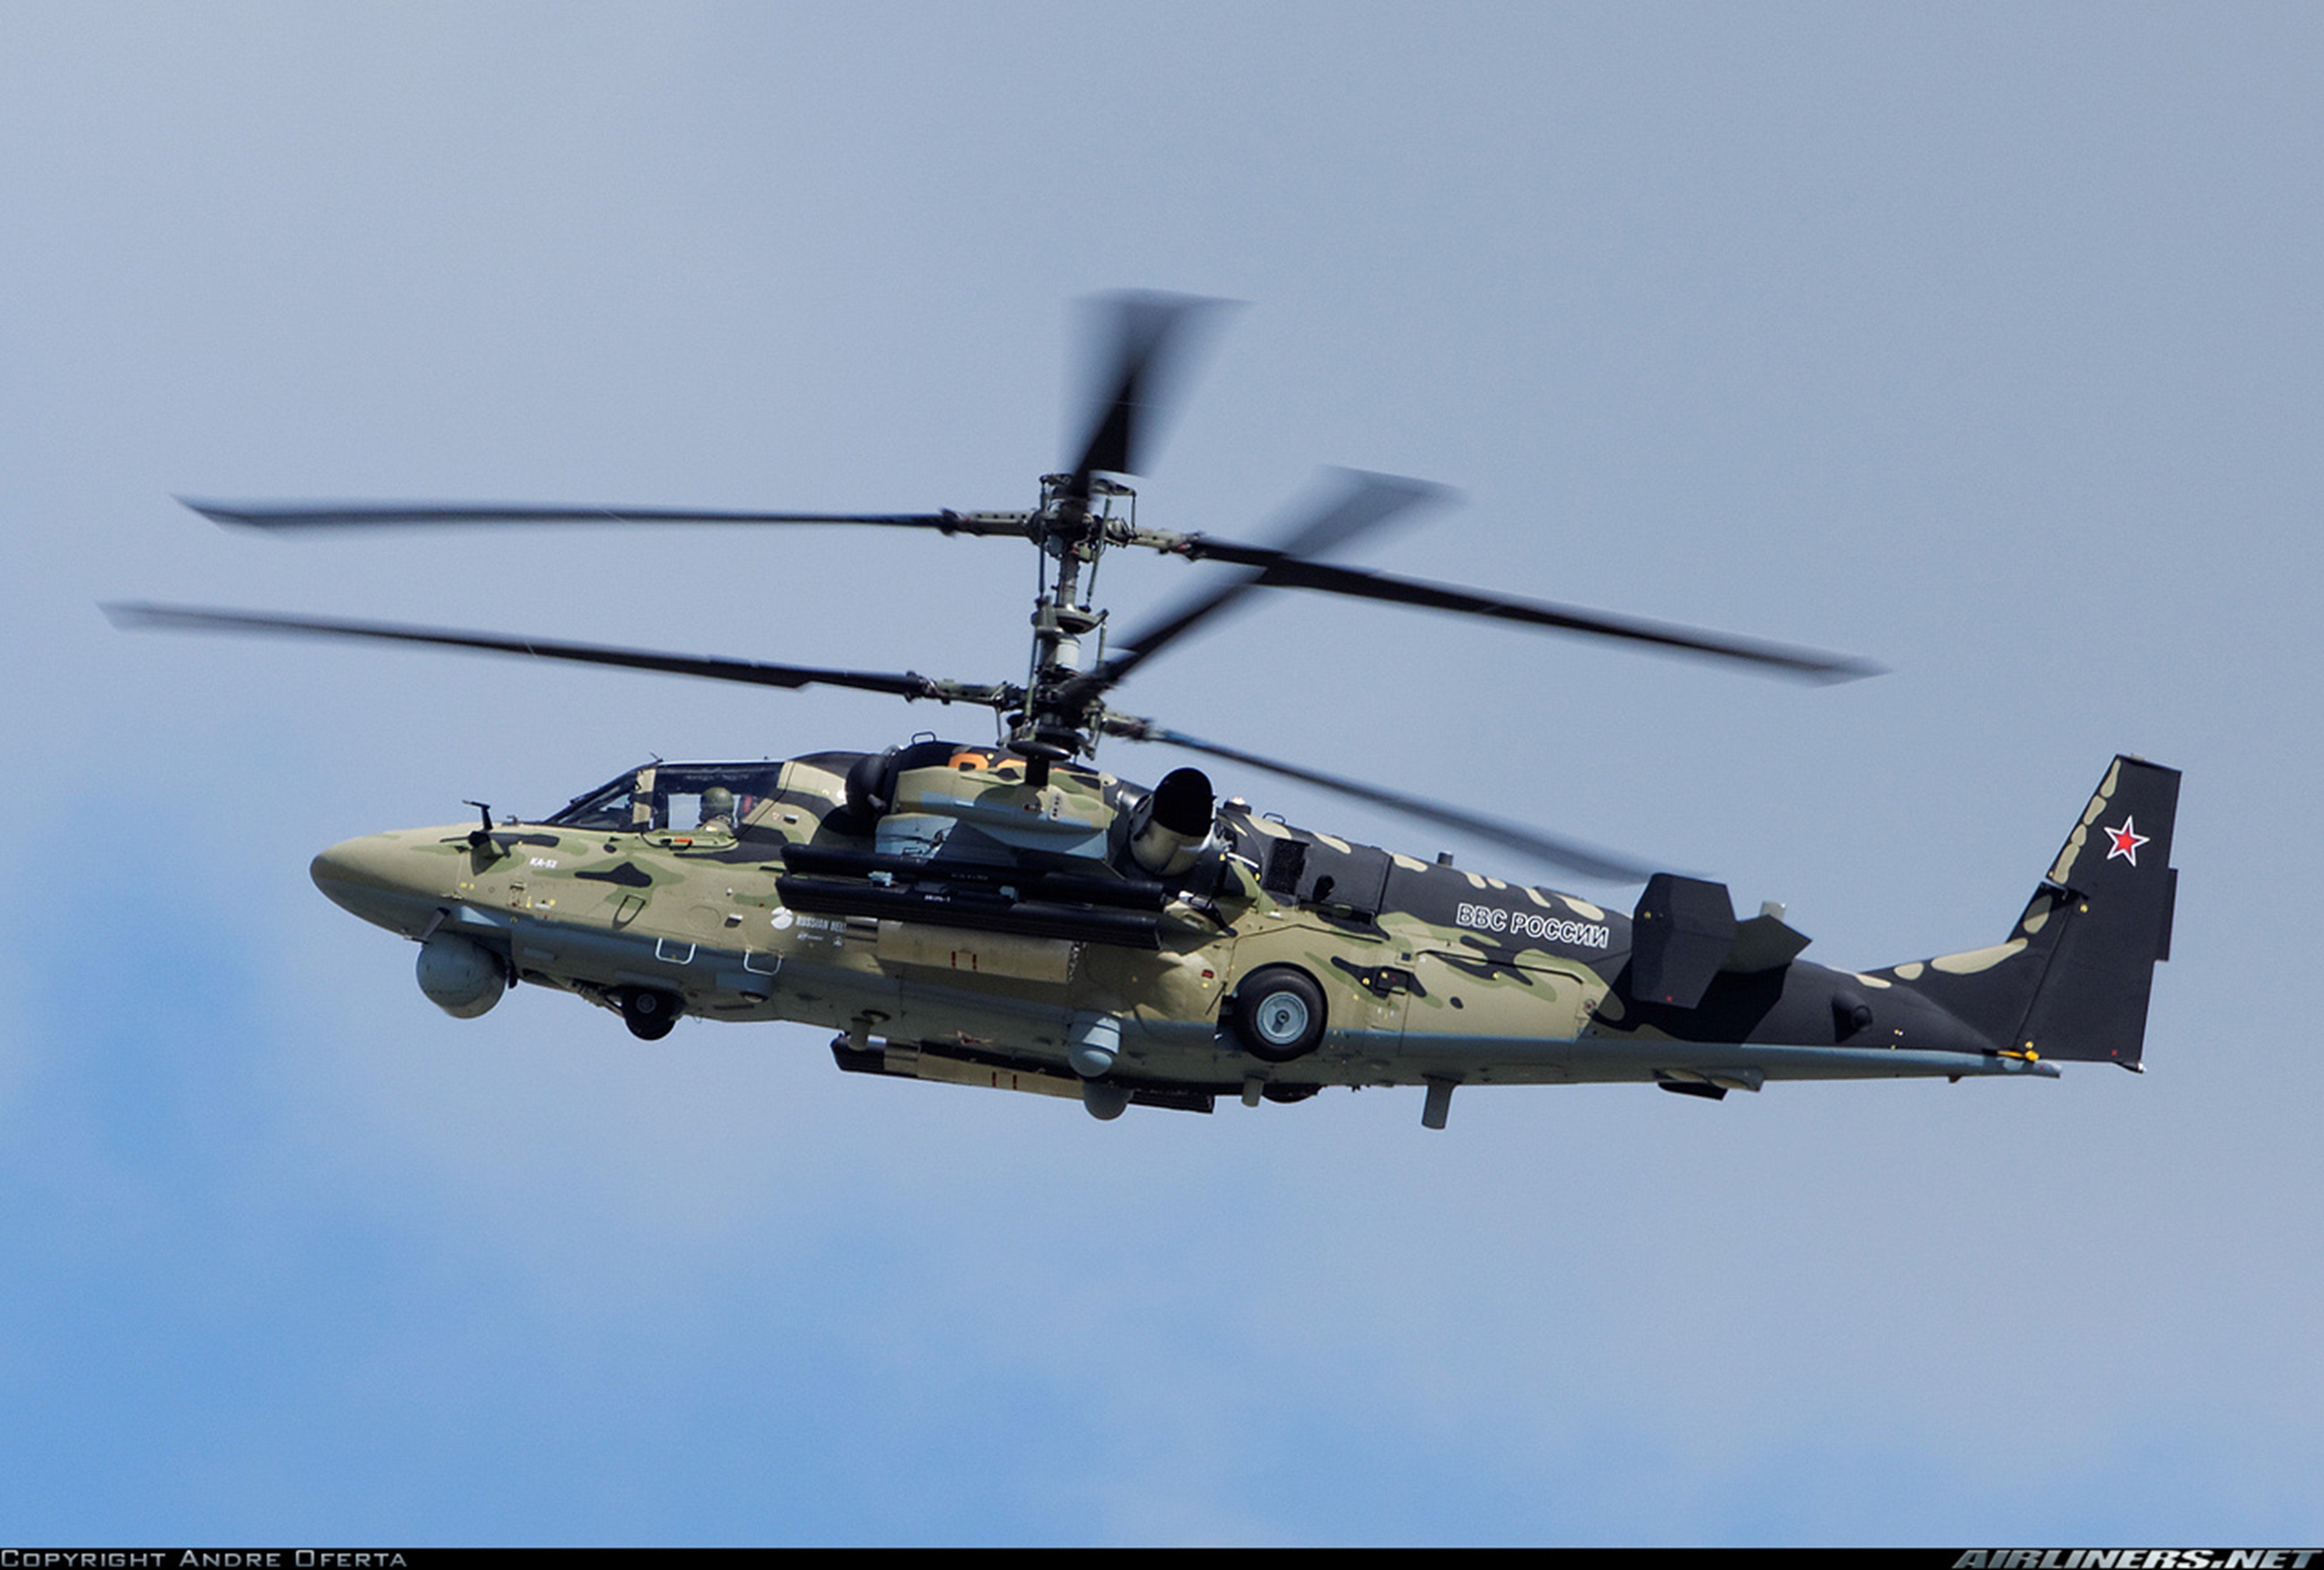 kamov, Ka 52, Alligator, Russian, Red, Star, Russia, Helicopter, Aircraft, Attack, Military, Air force Wallpaper